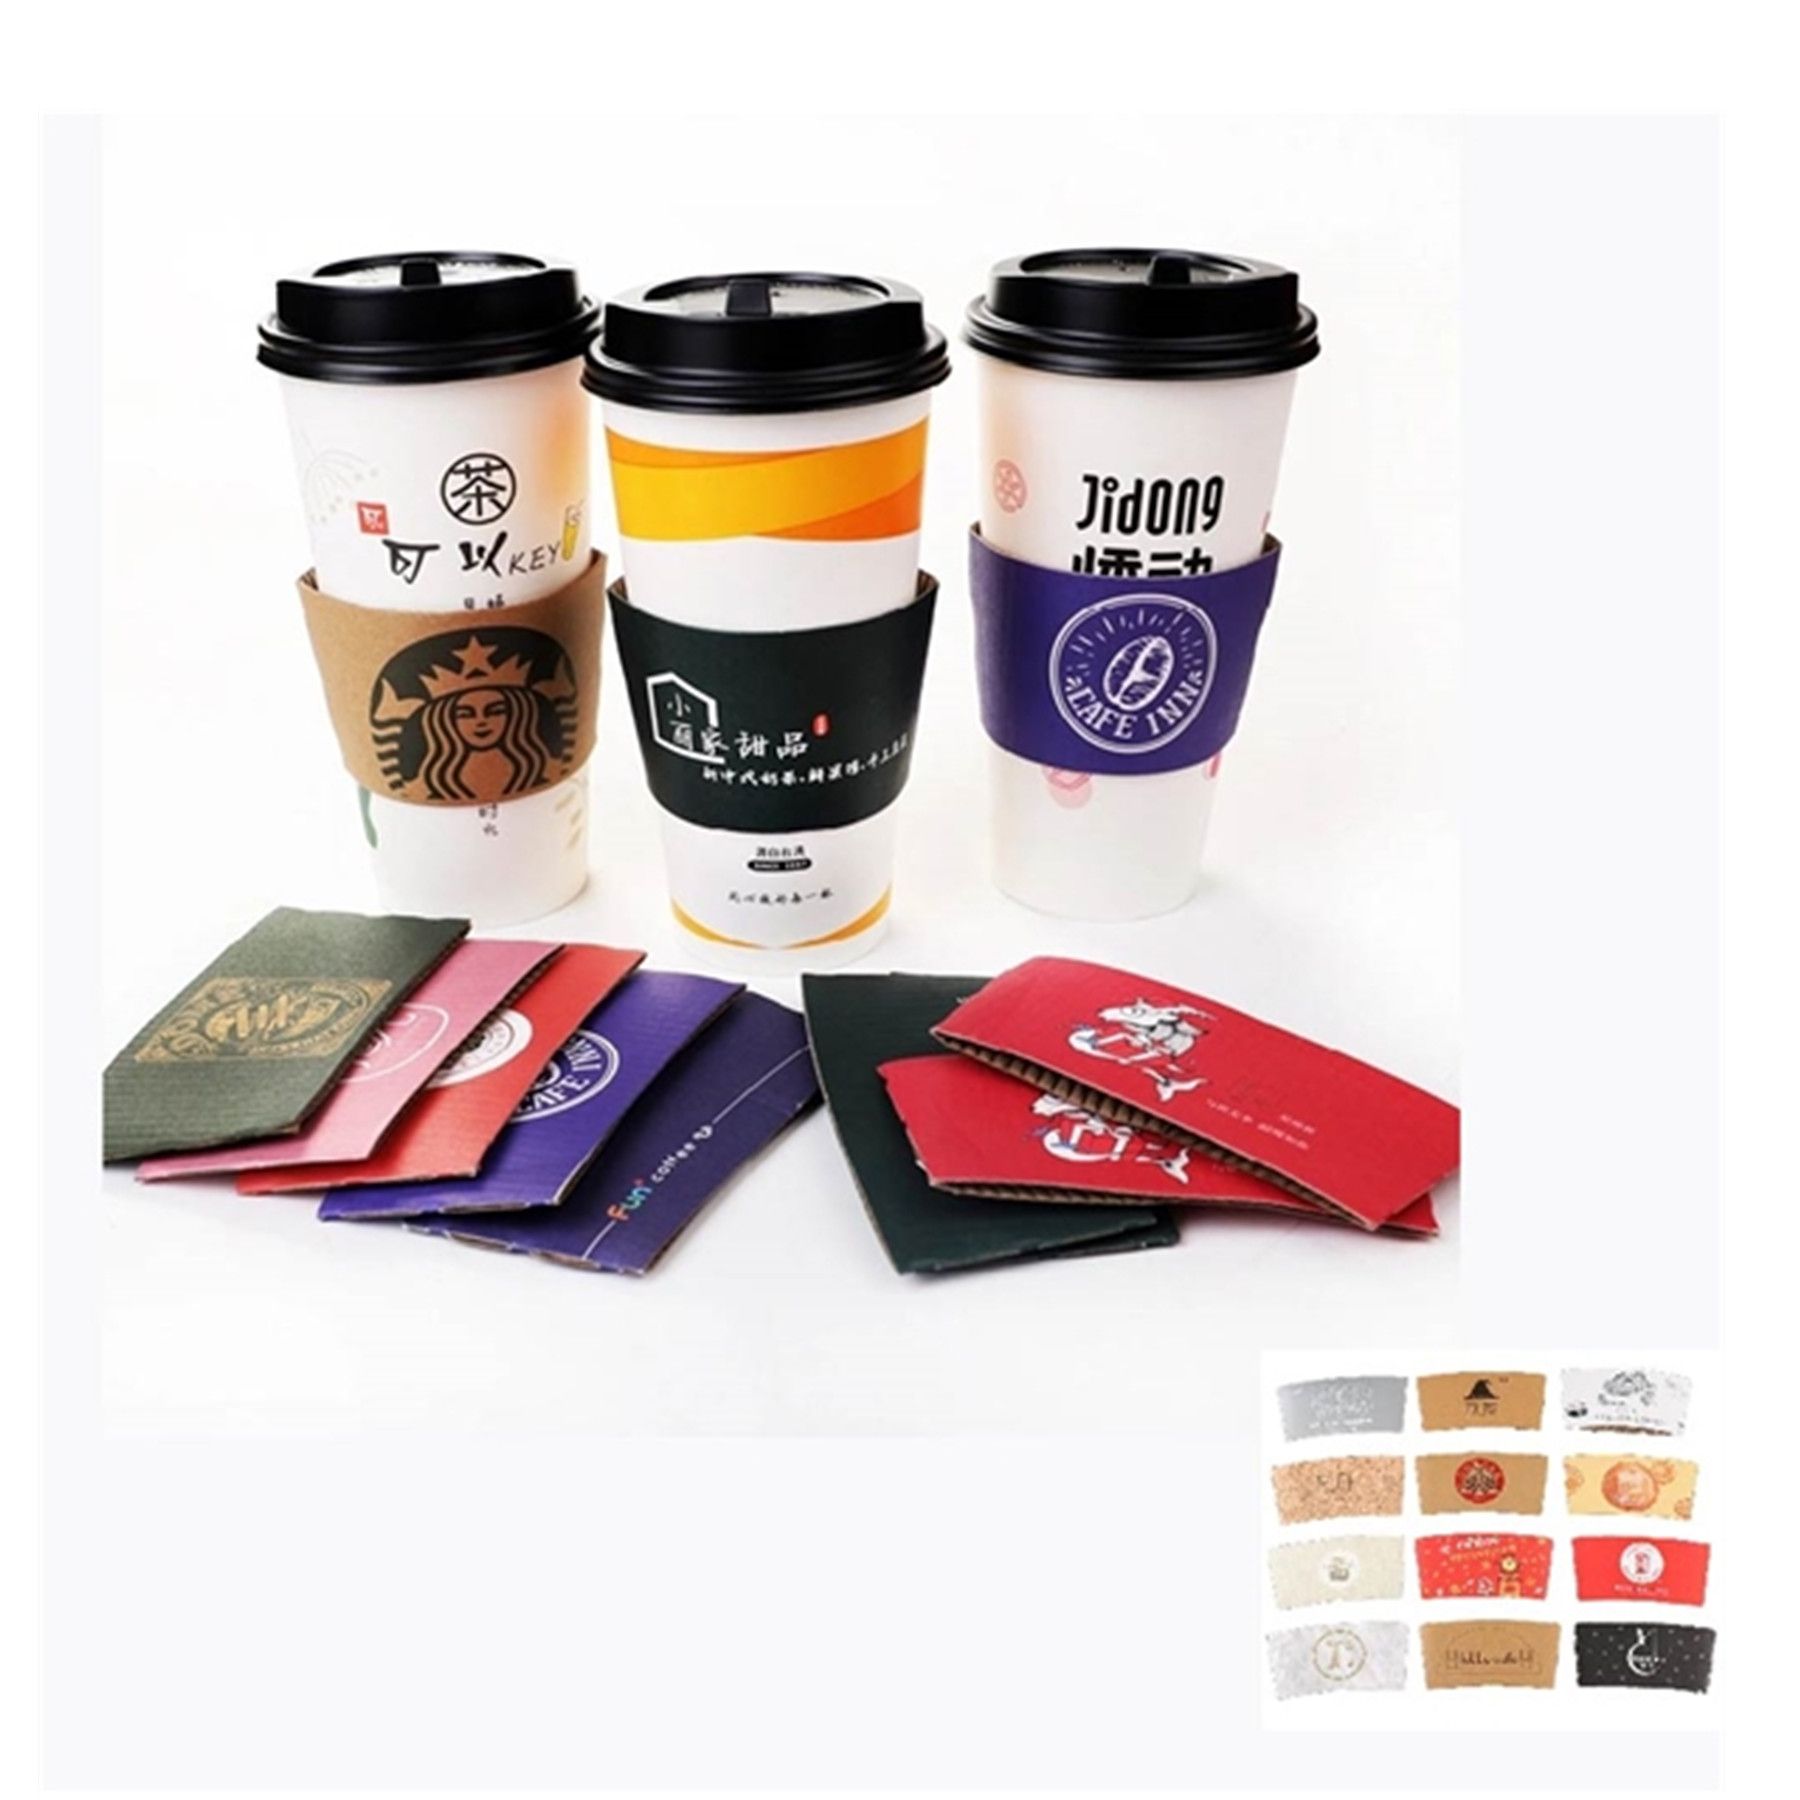 The Tall Coffee Cup Sleeve 10 to 20 oz - 4 3/4" W x 2 1/4" H - Printed 1 Color, 1 Side